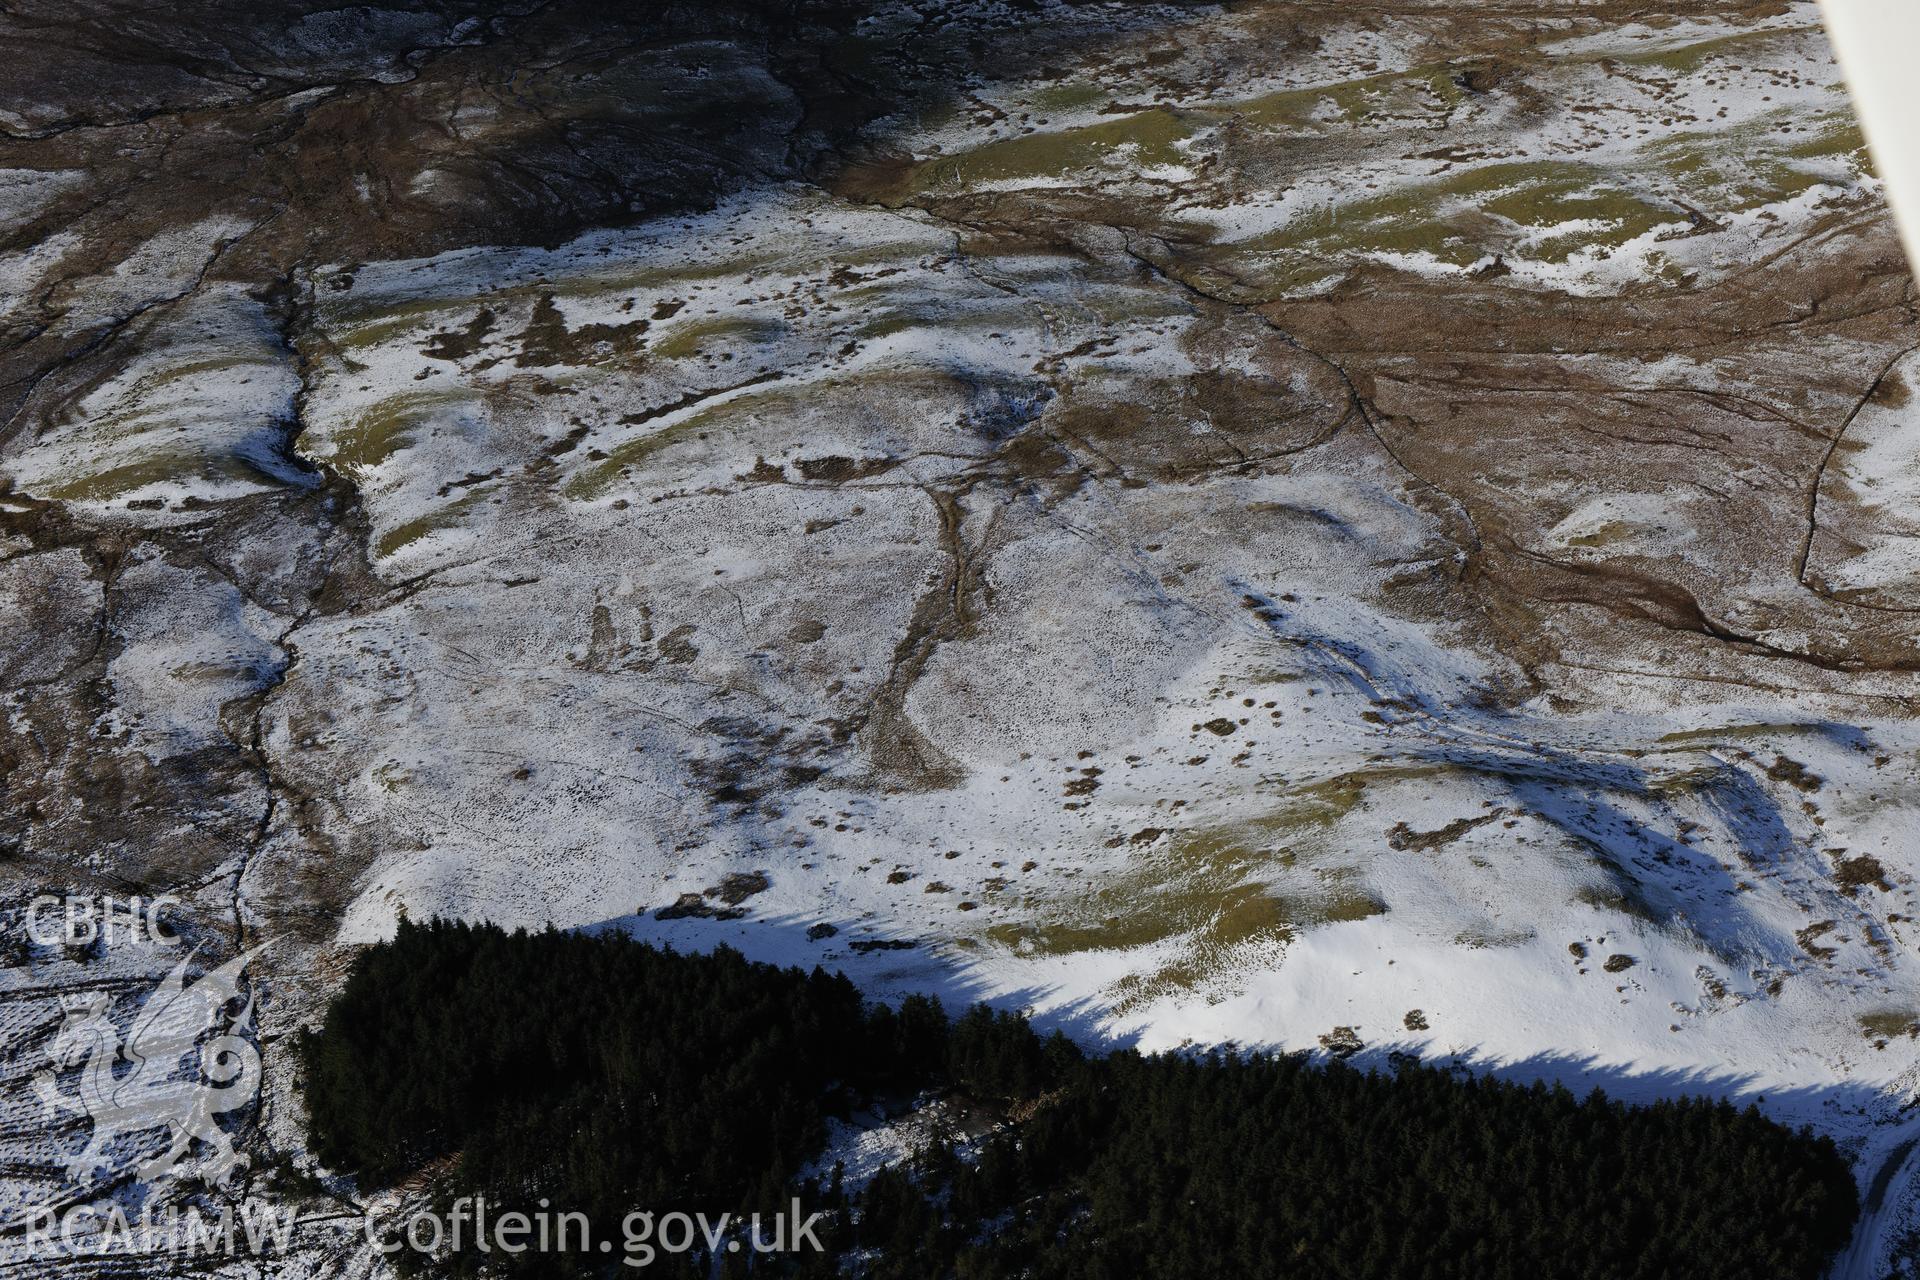 Blaen Glasffrwd cairn, south east of Pontrhydfendigaid. Oblique aerial photograph taken during the Royal Commission's programme of archaeological aerial reconnaissance by Toby Driver on 4th February 2015.